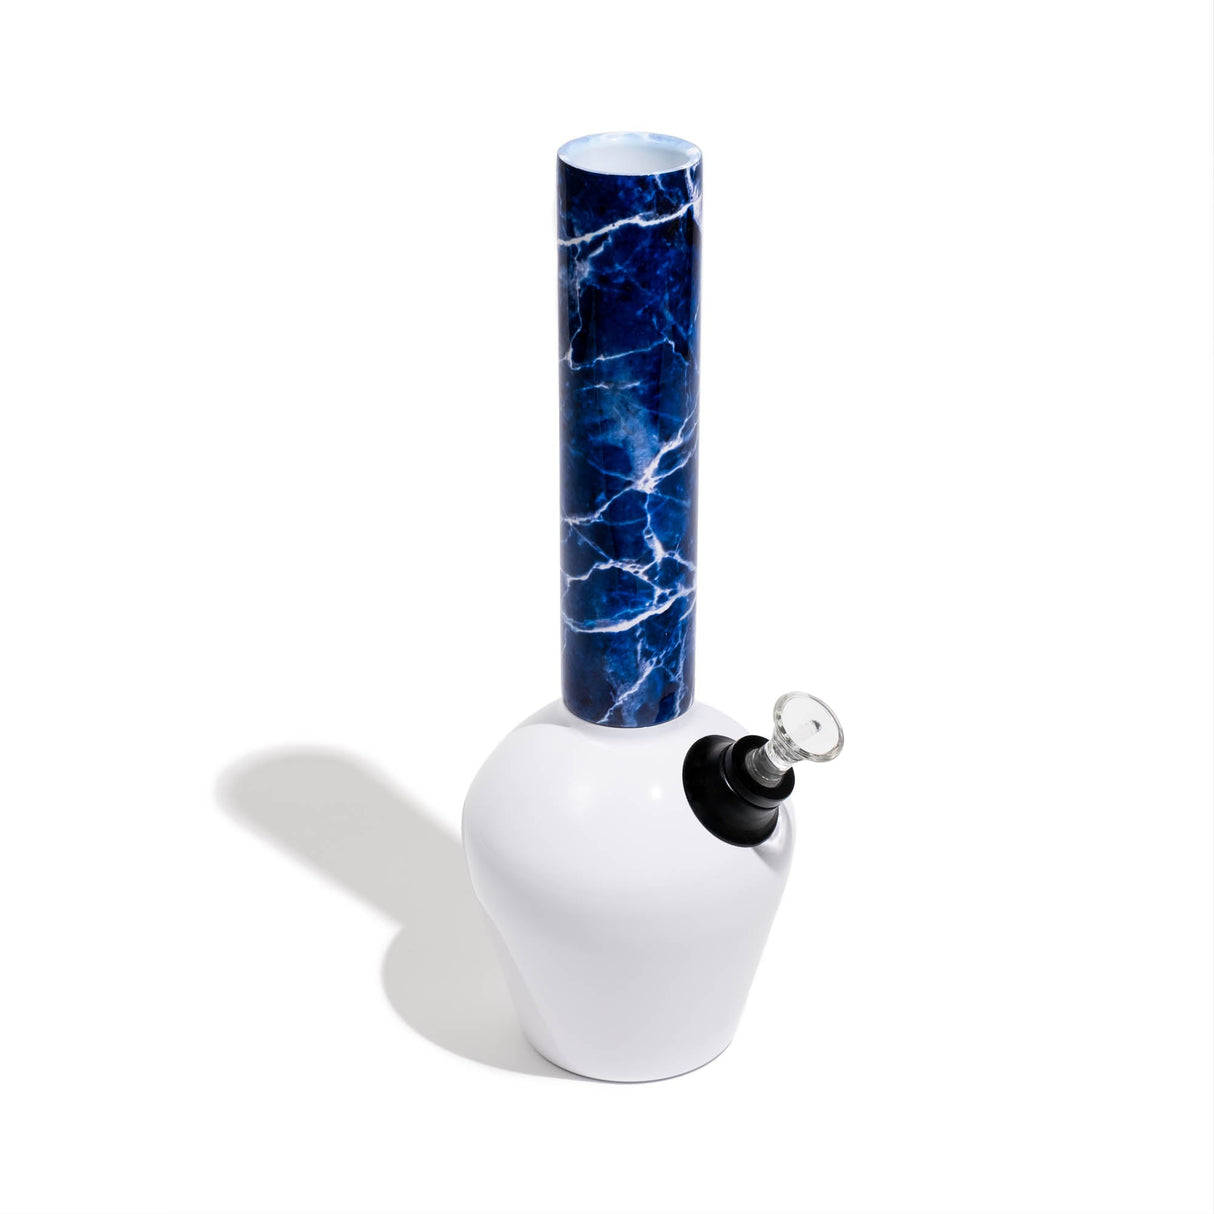 Chill Mix & Match Series bong with gloss white base and blue marbled tube, top view